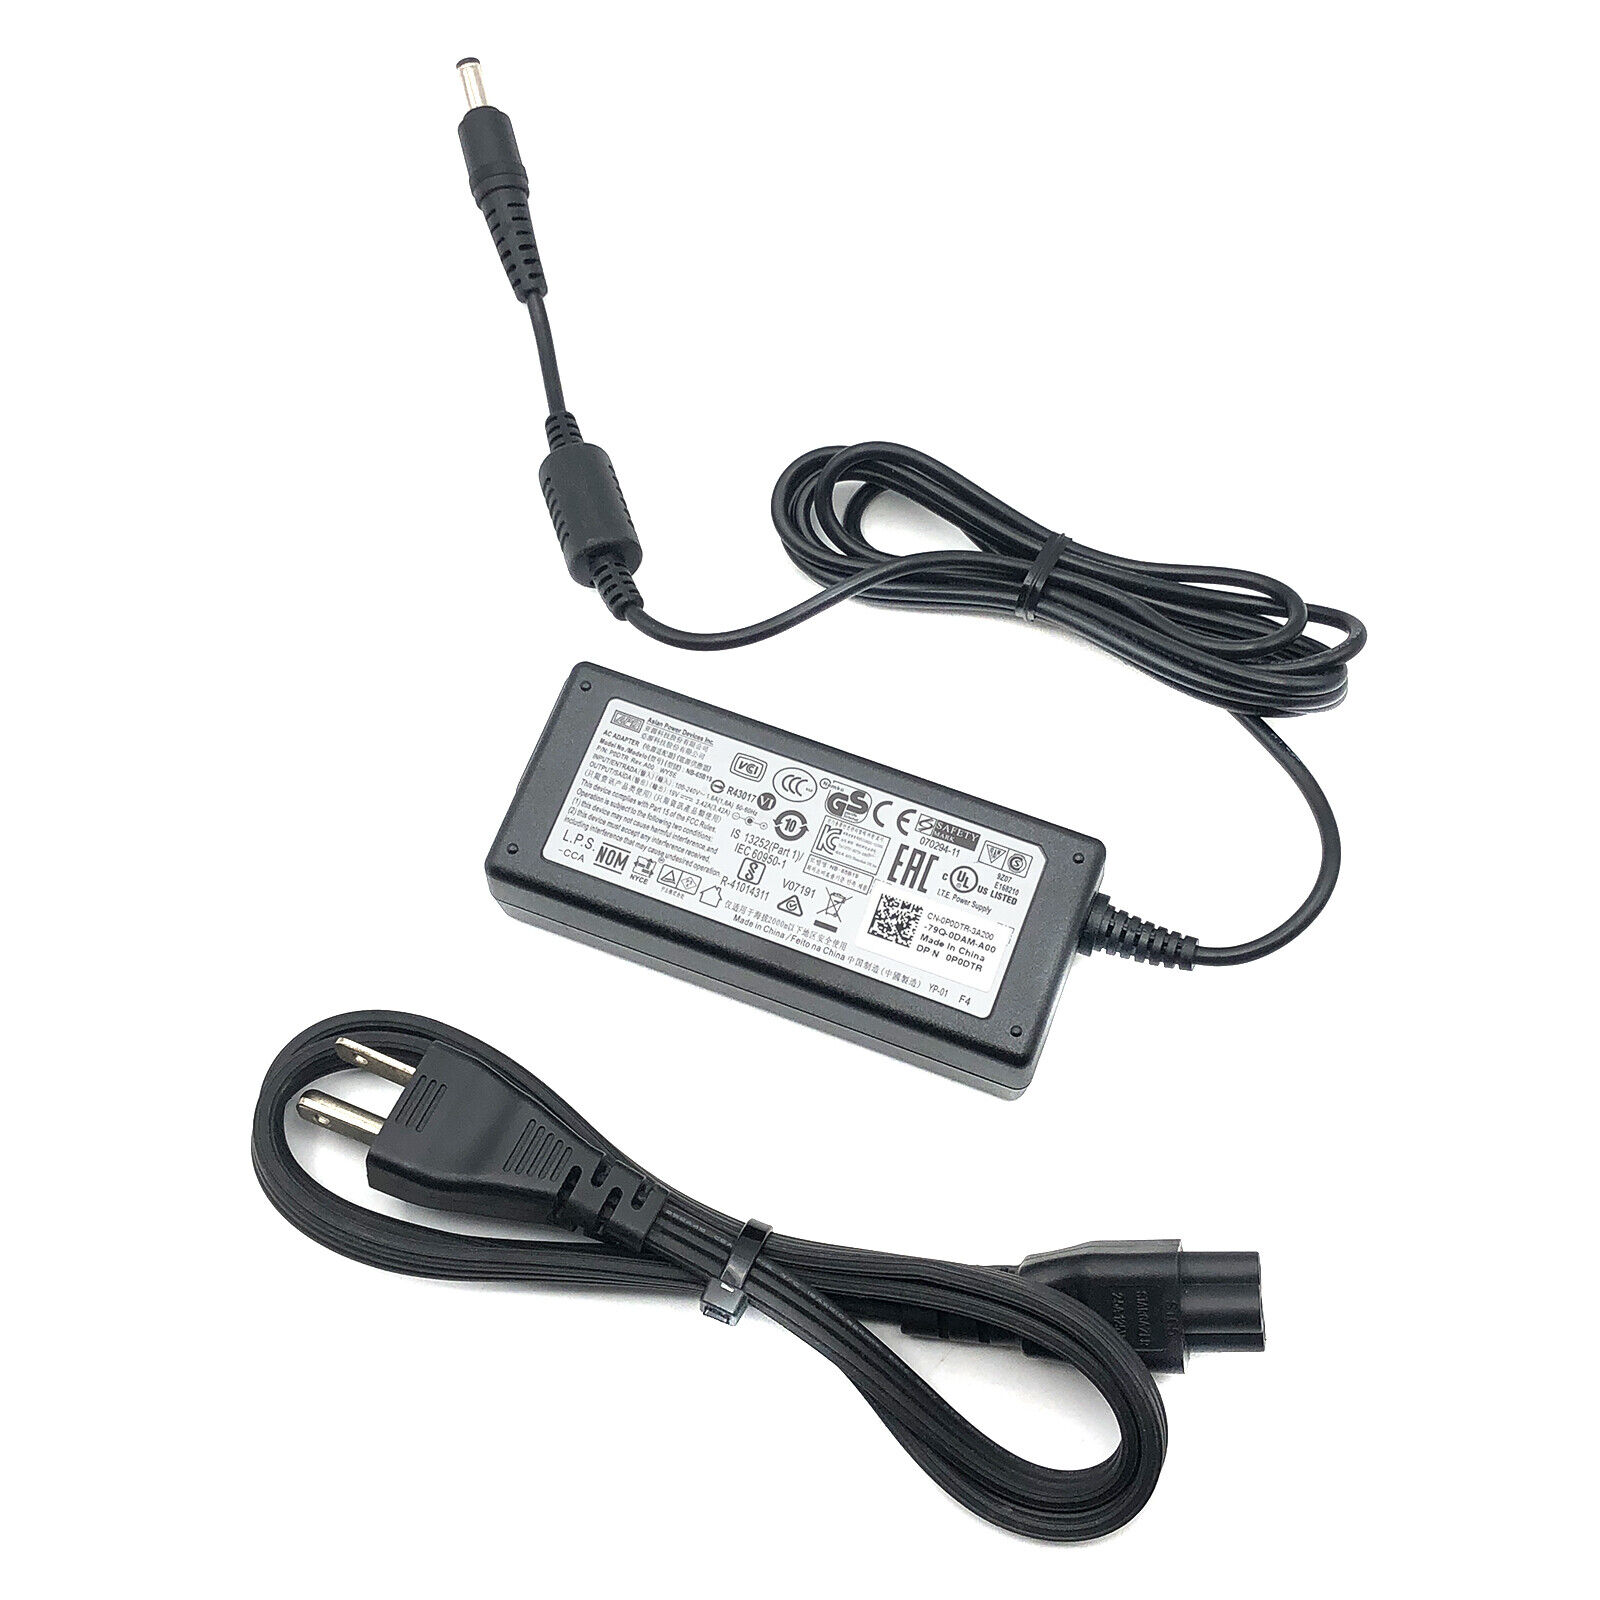 NEW Genuine APD AC Power Adapter For Dell Wyse 3040 Thin Client 65W Charger